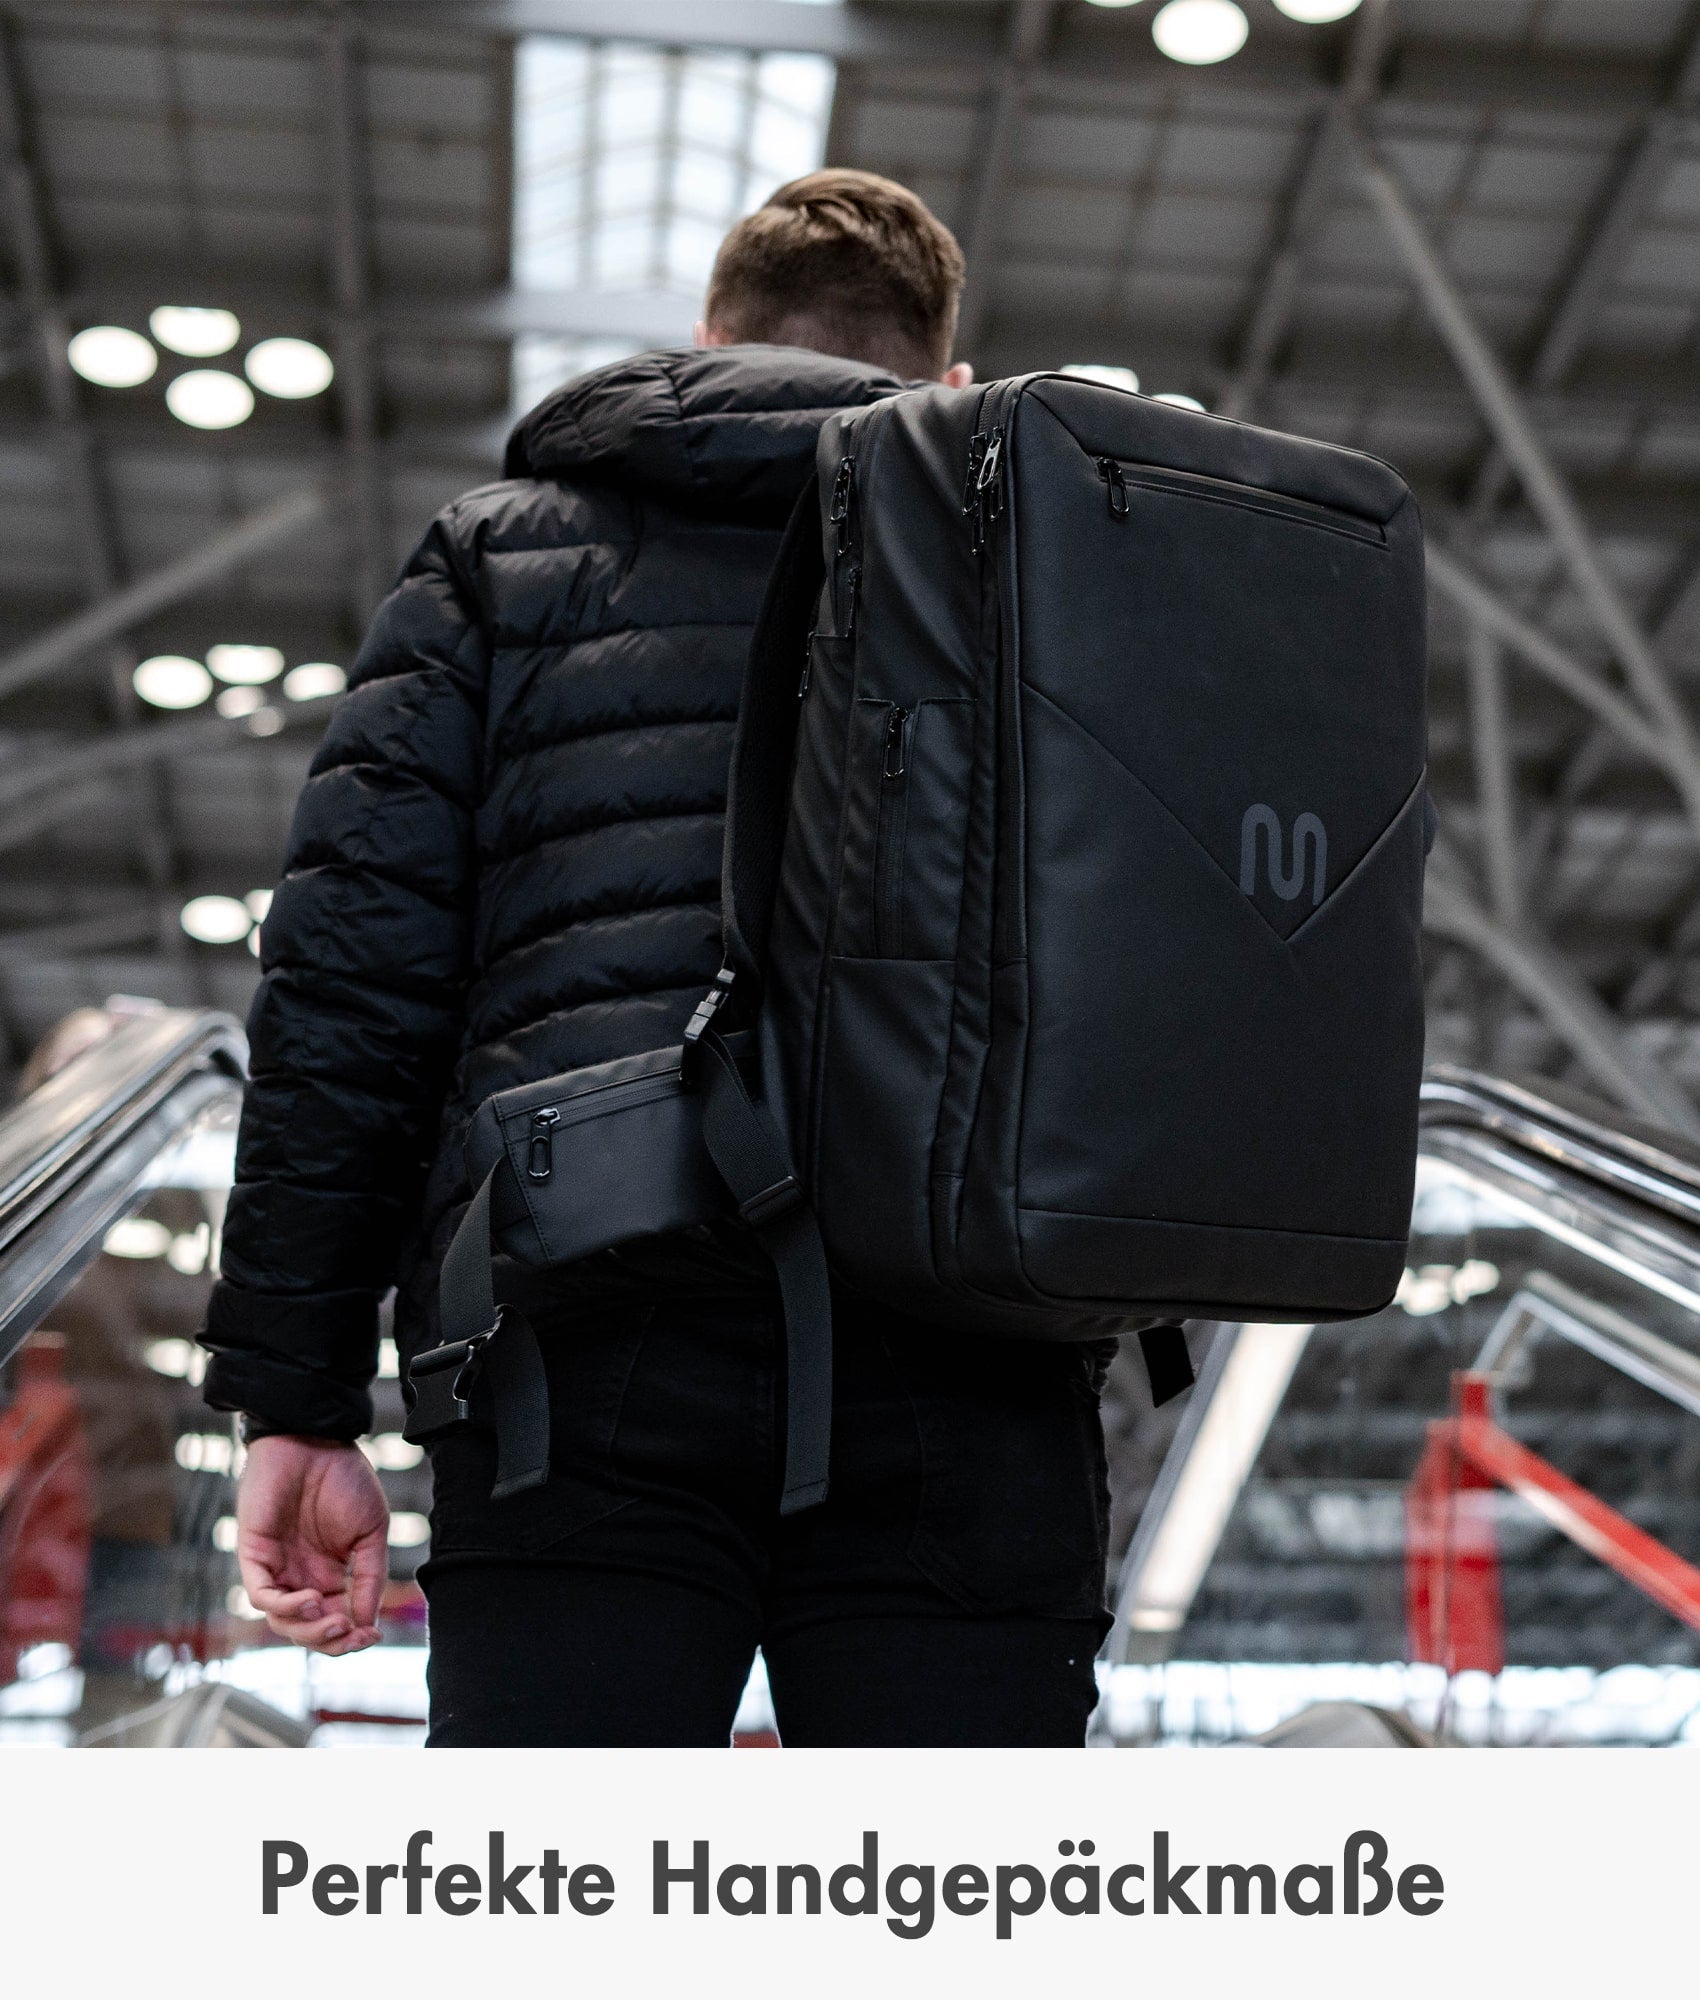 Travel backpack apollo